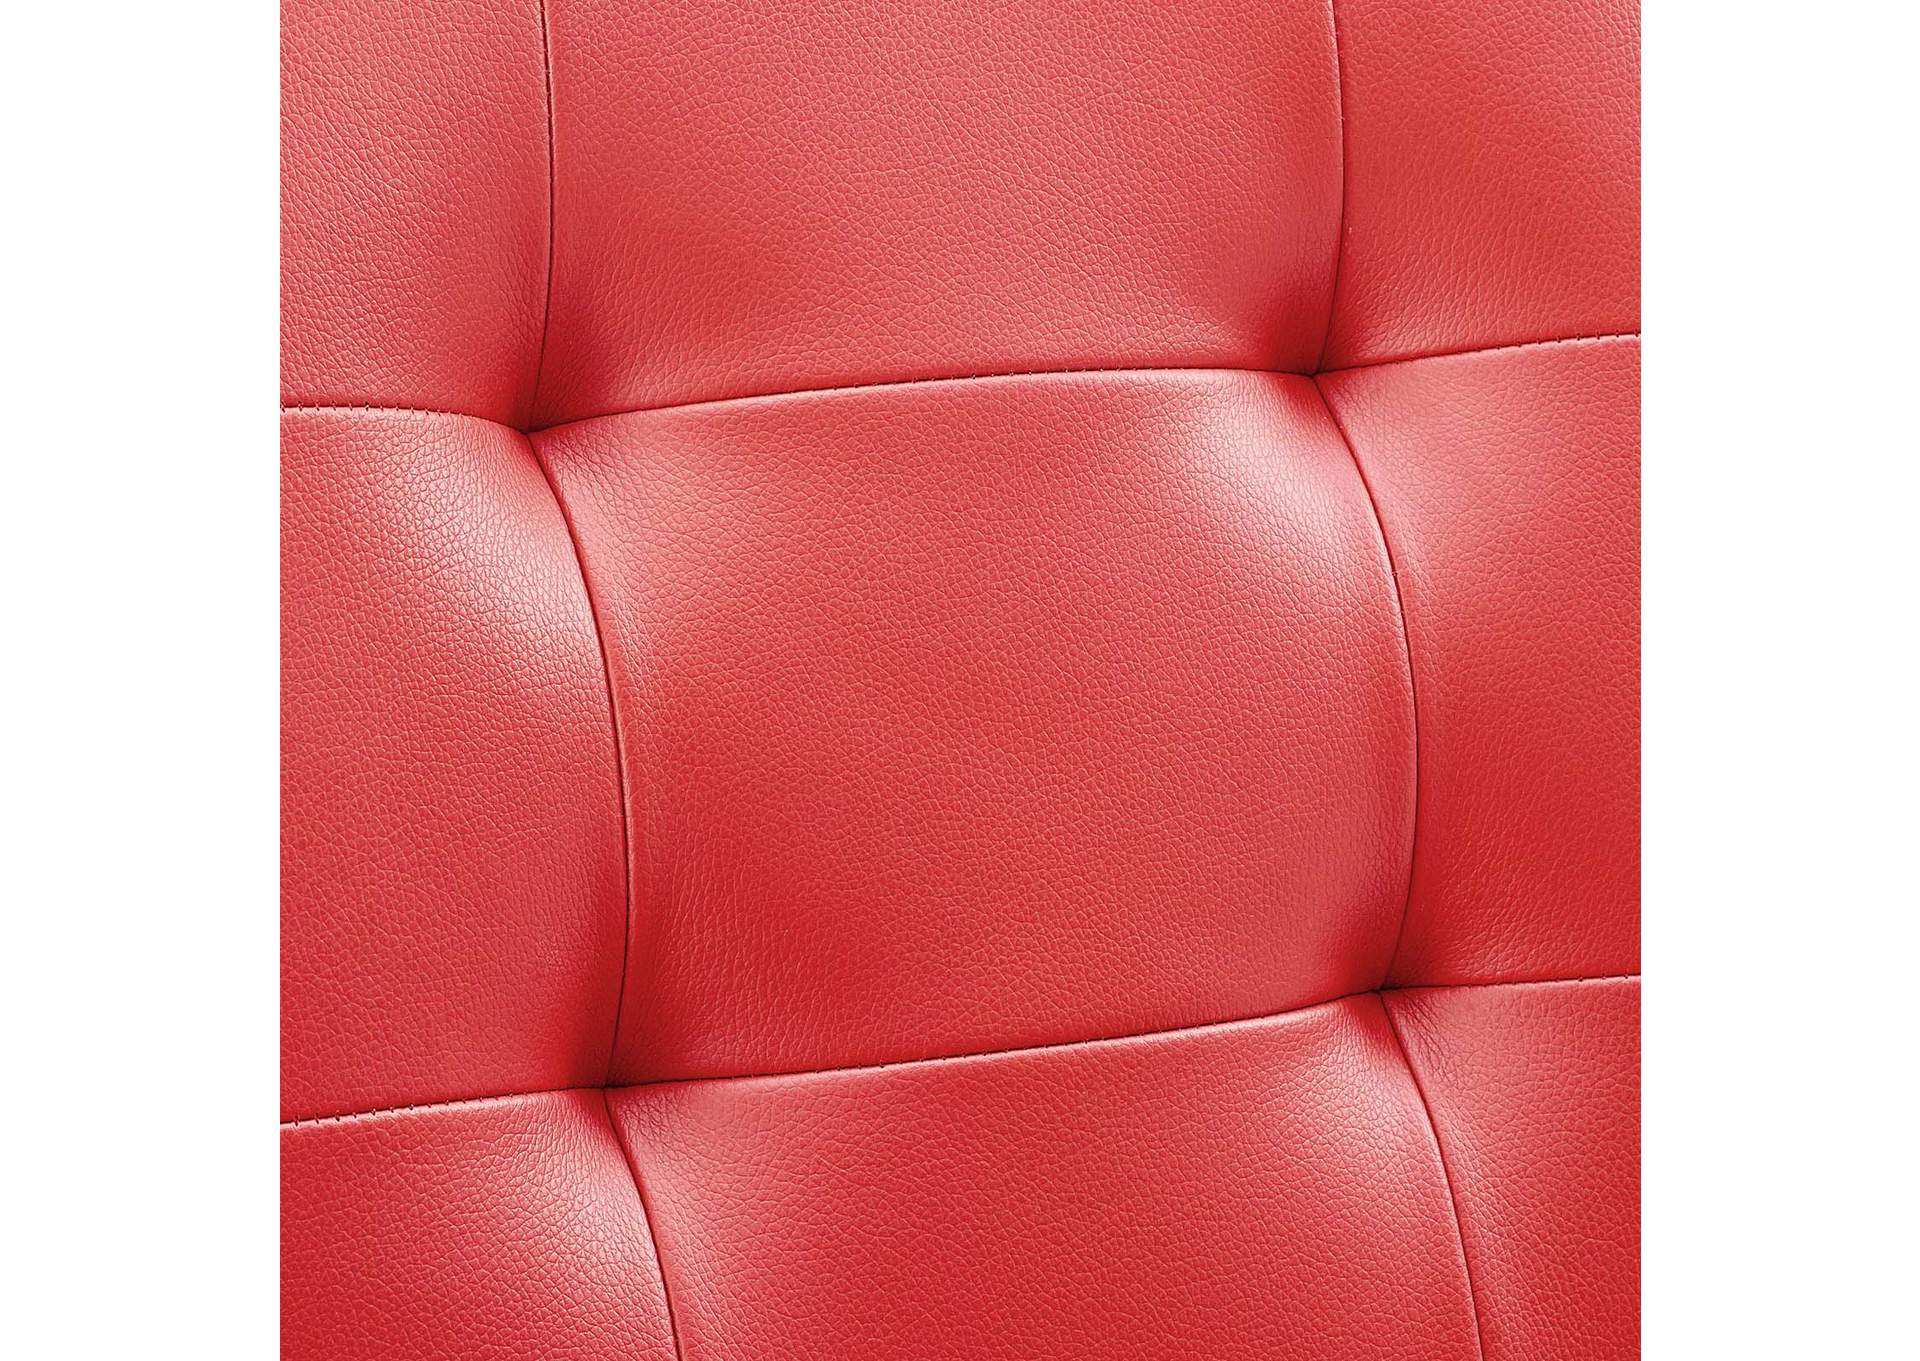 Prim Red Armless Mid Back Office Chair,Modway